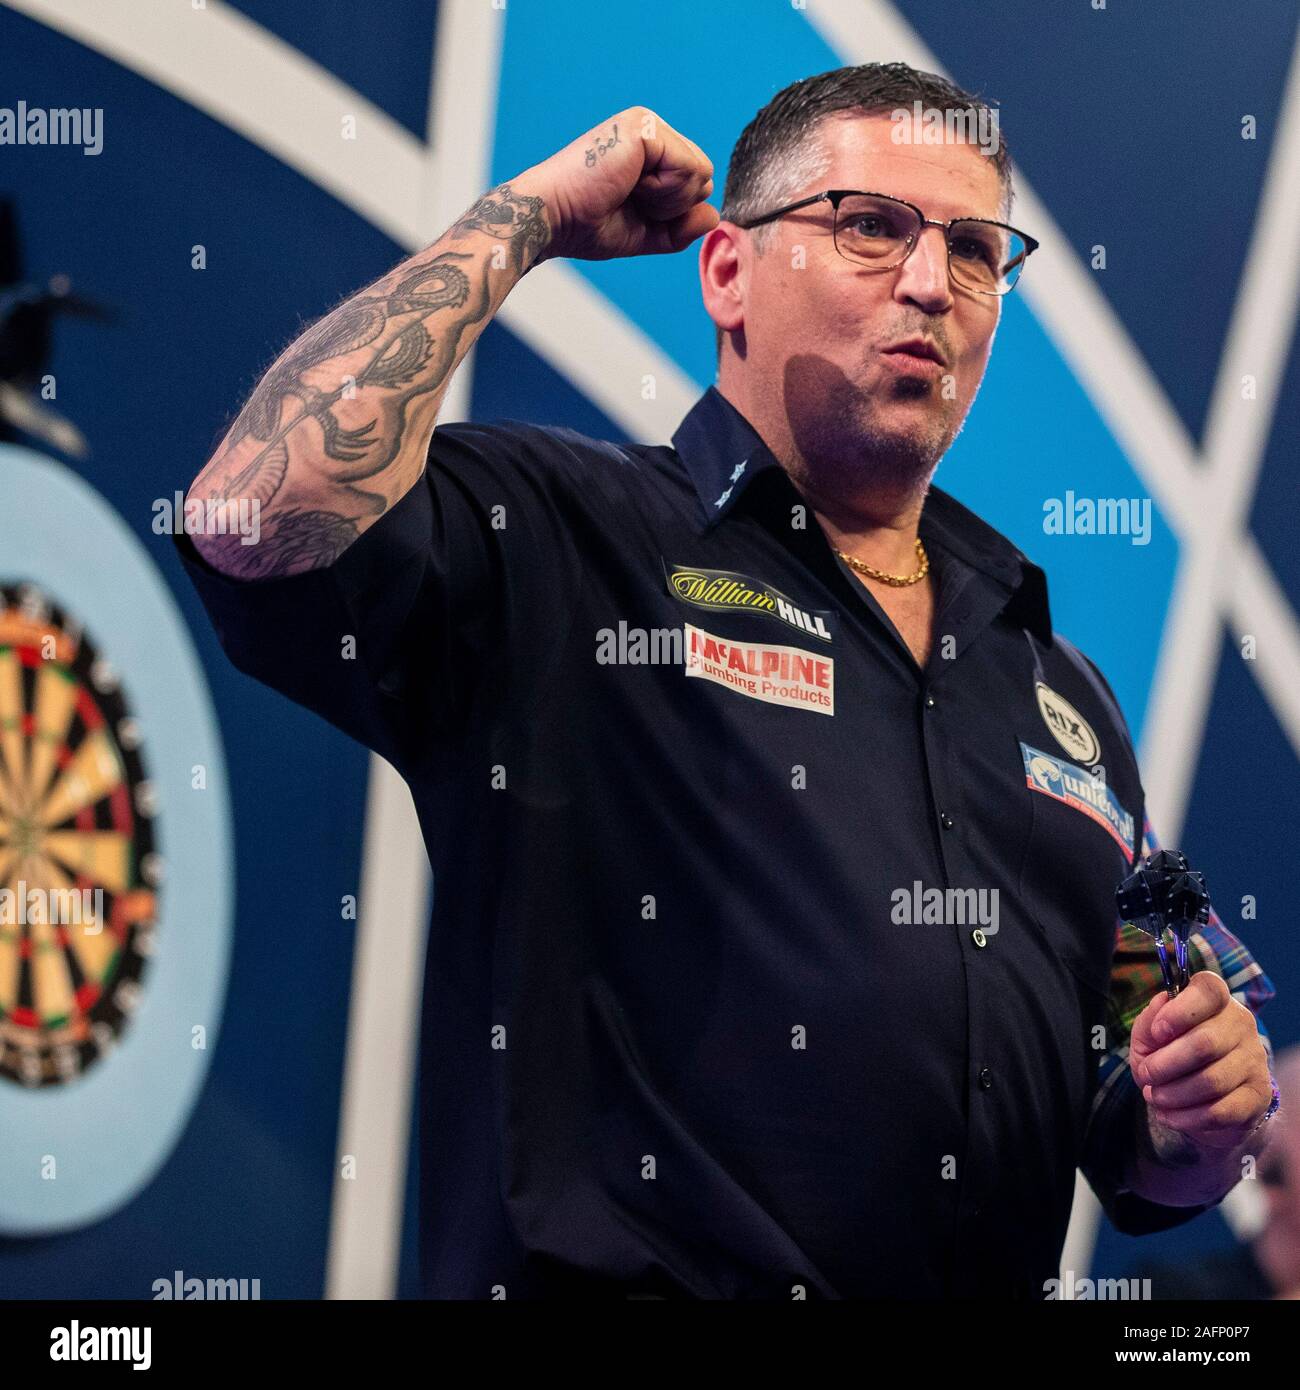 Gary Anderson Darts High Resolution Stock Photography and Images - Alamy